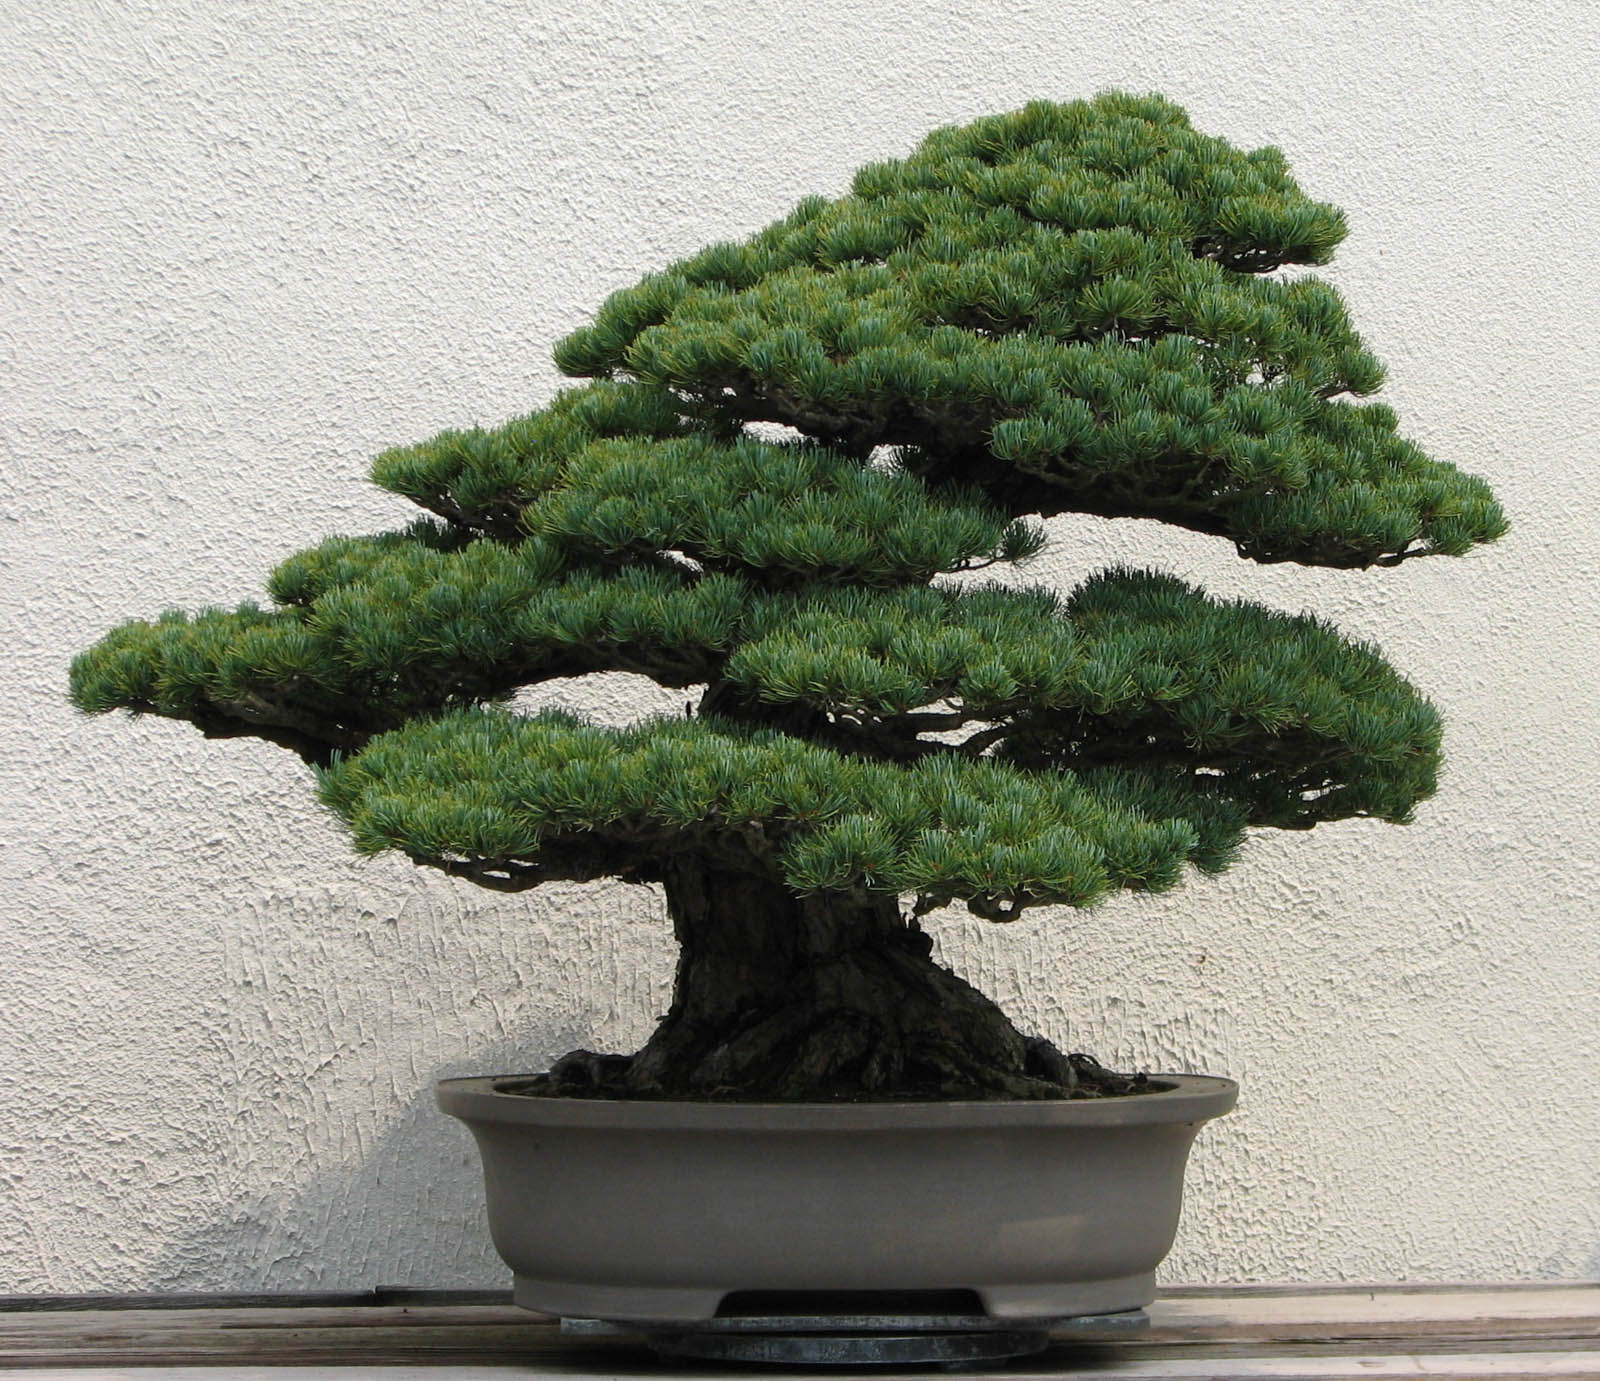 Amazing Bonsai Tree Small of the decade Learn more here 